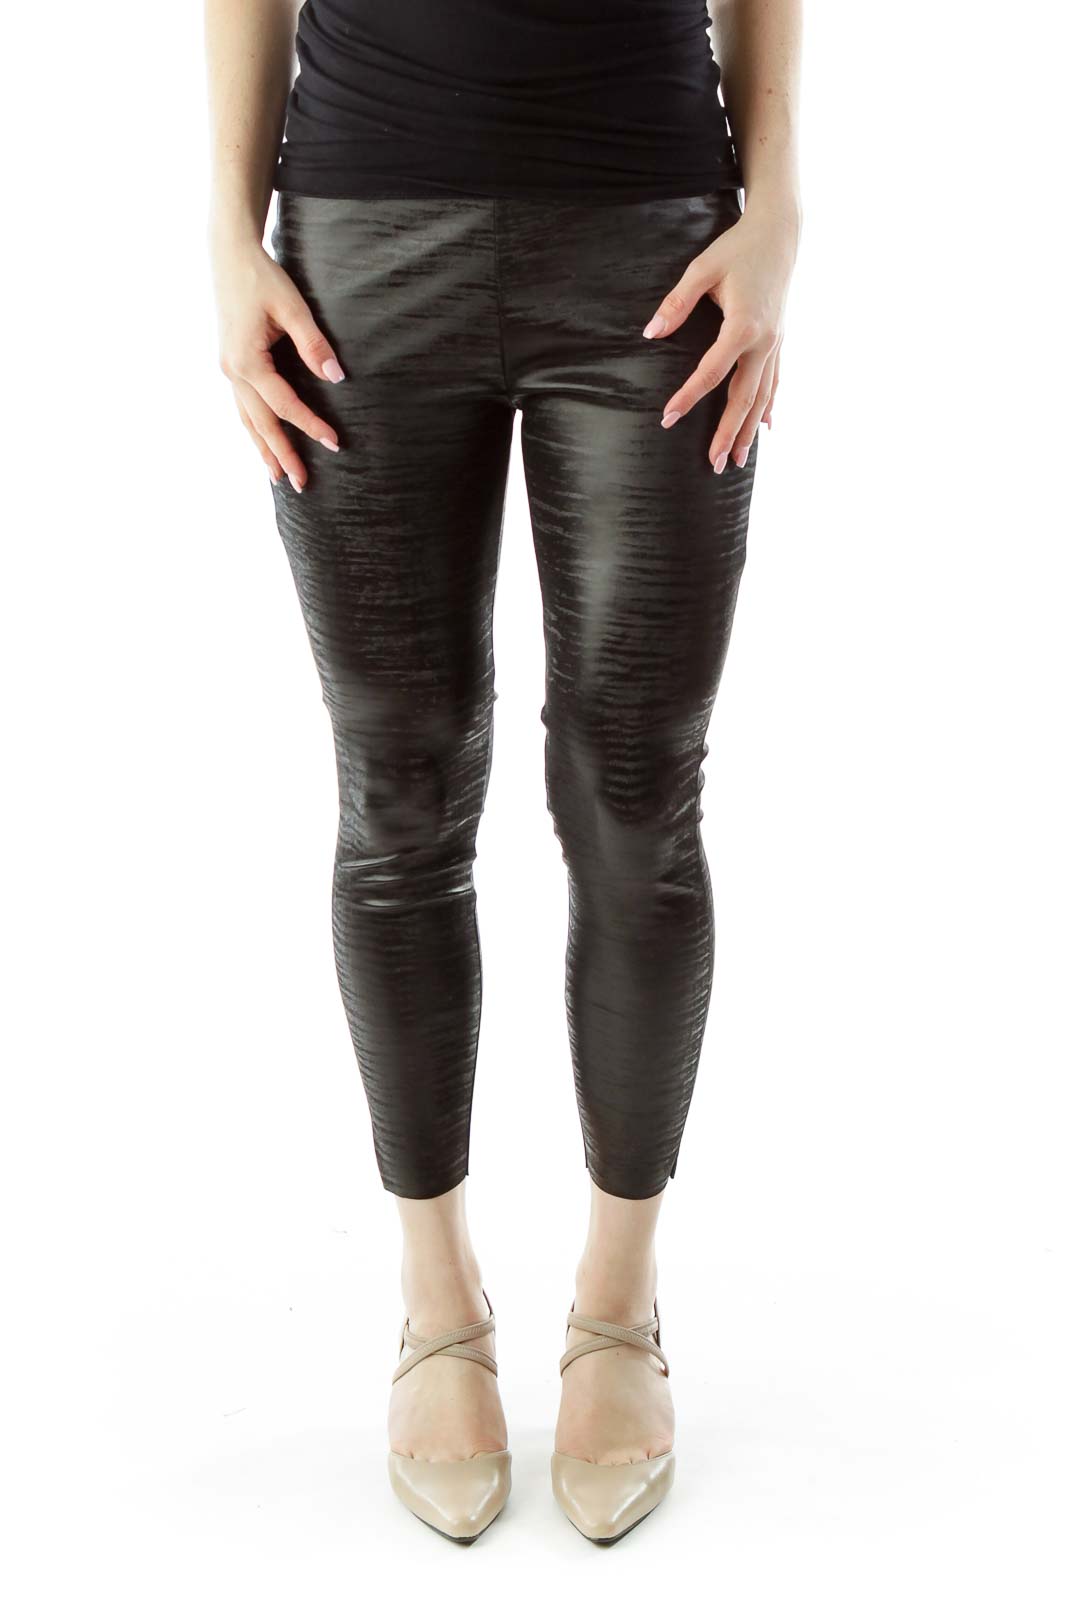 French Connection skinny faux leather leggings in black